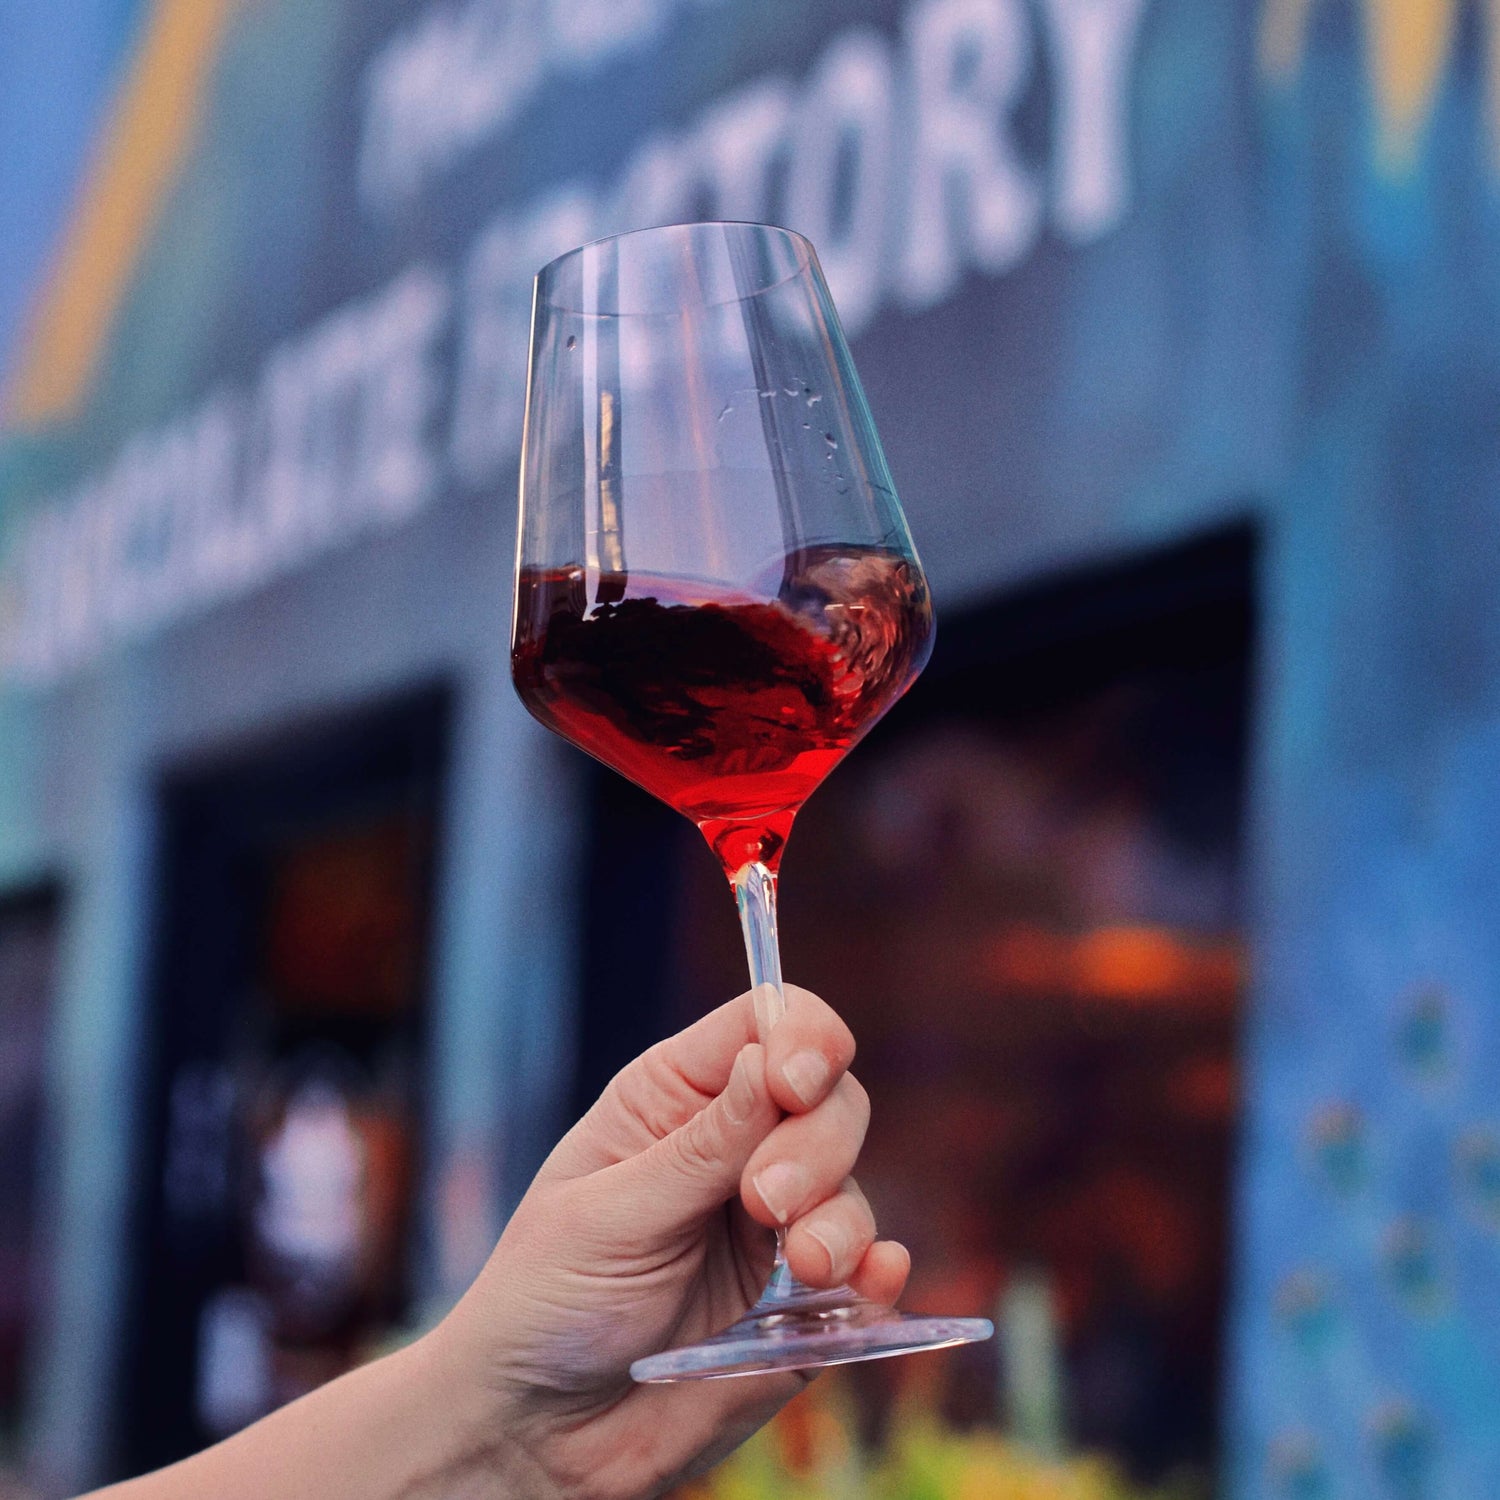 Image of hand holding wine glass in front of Mānoa Chocolate storefront